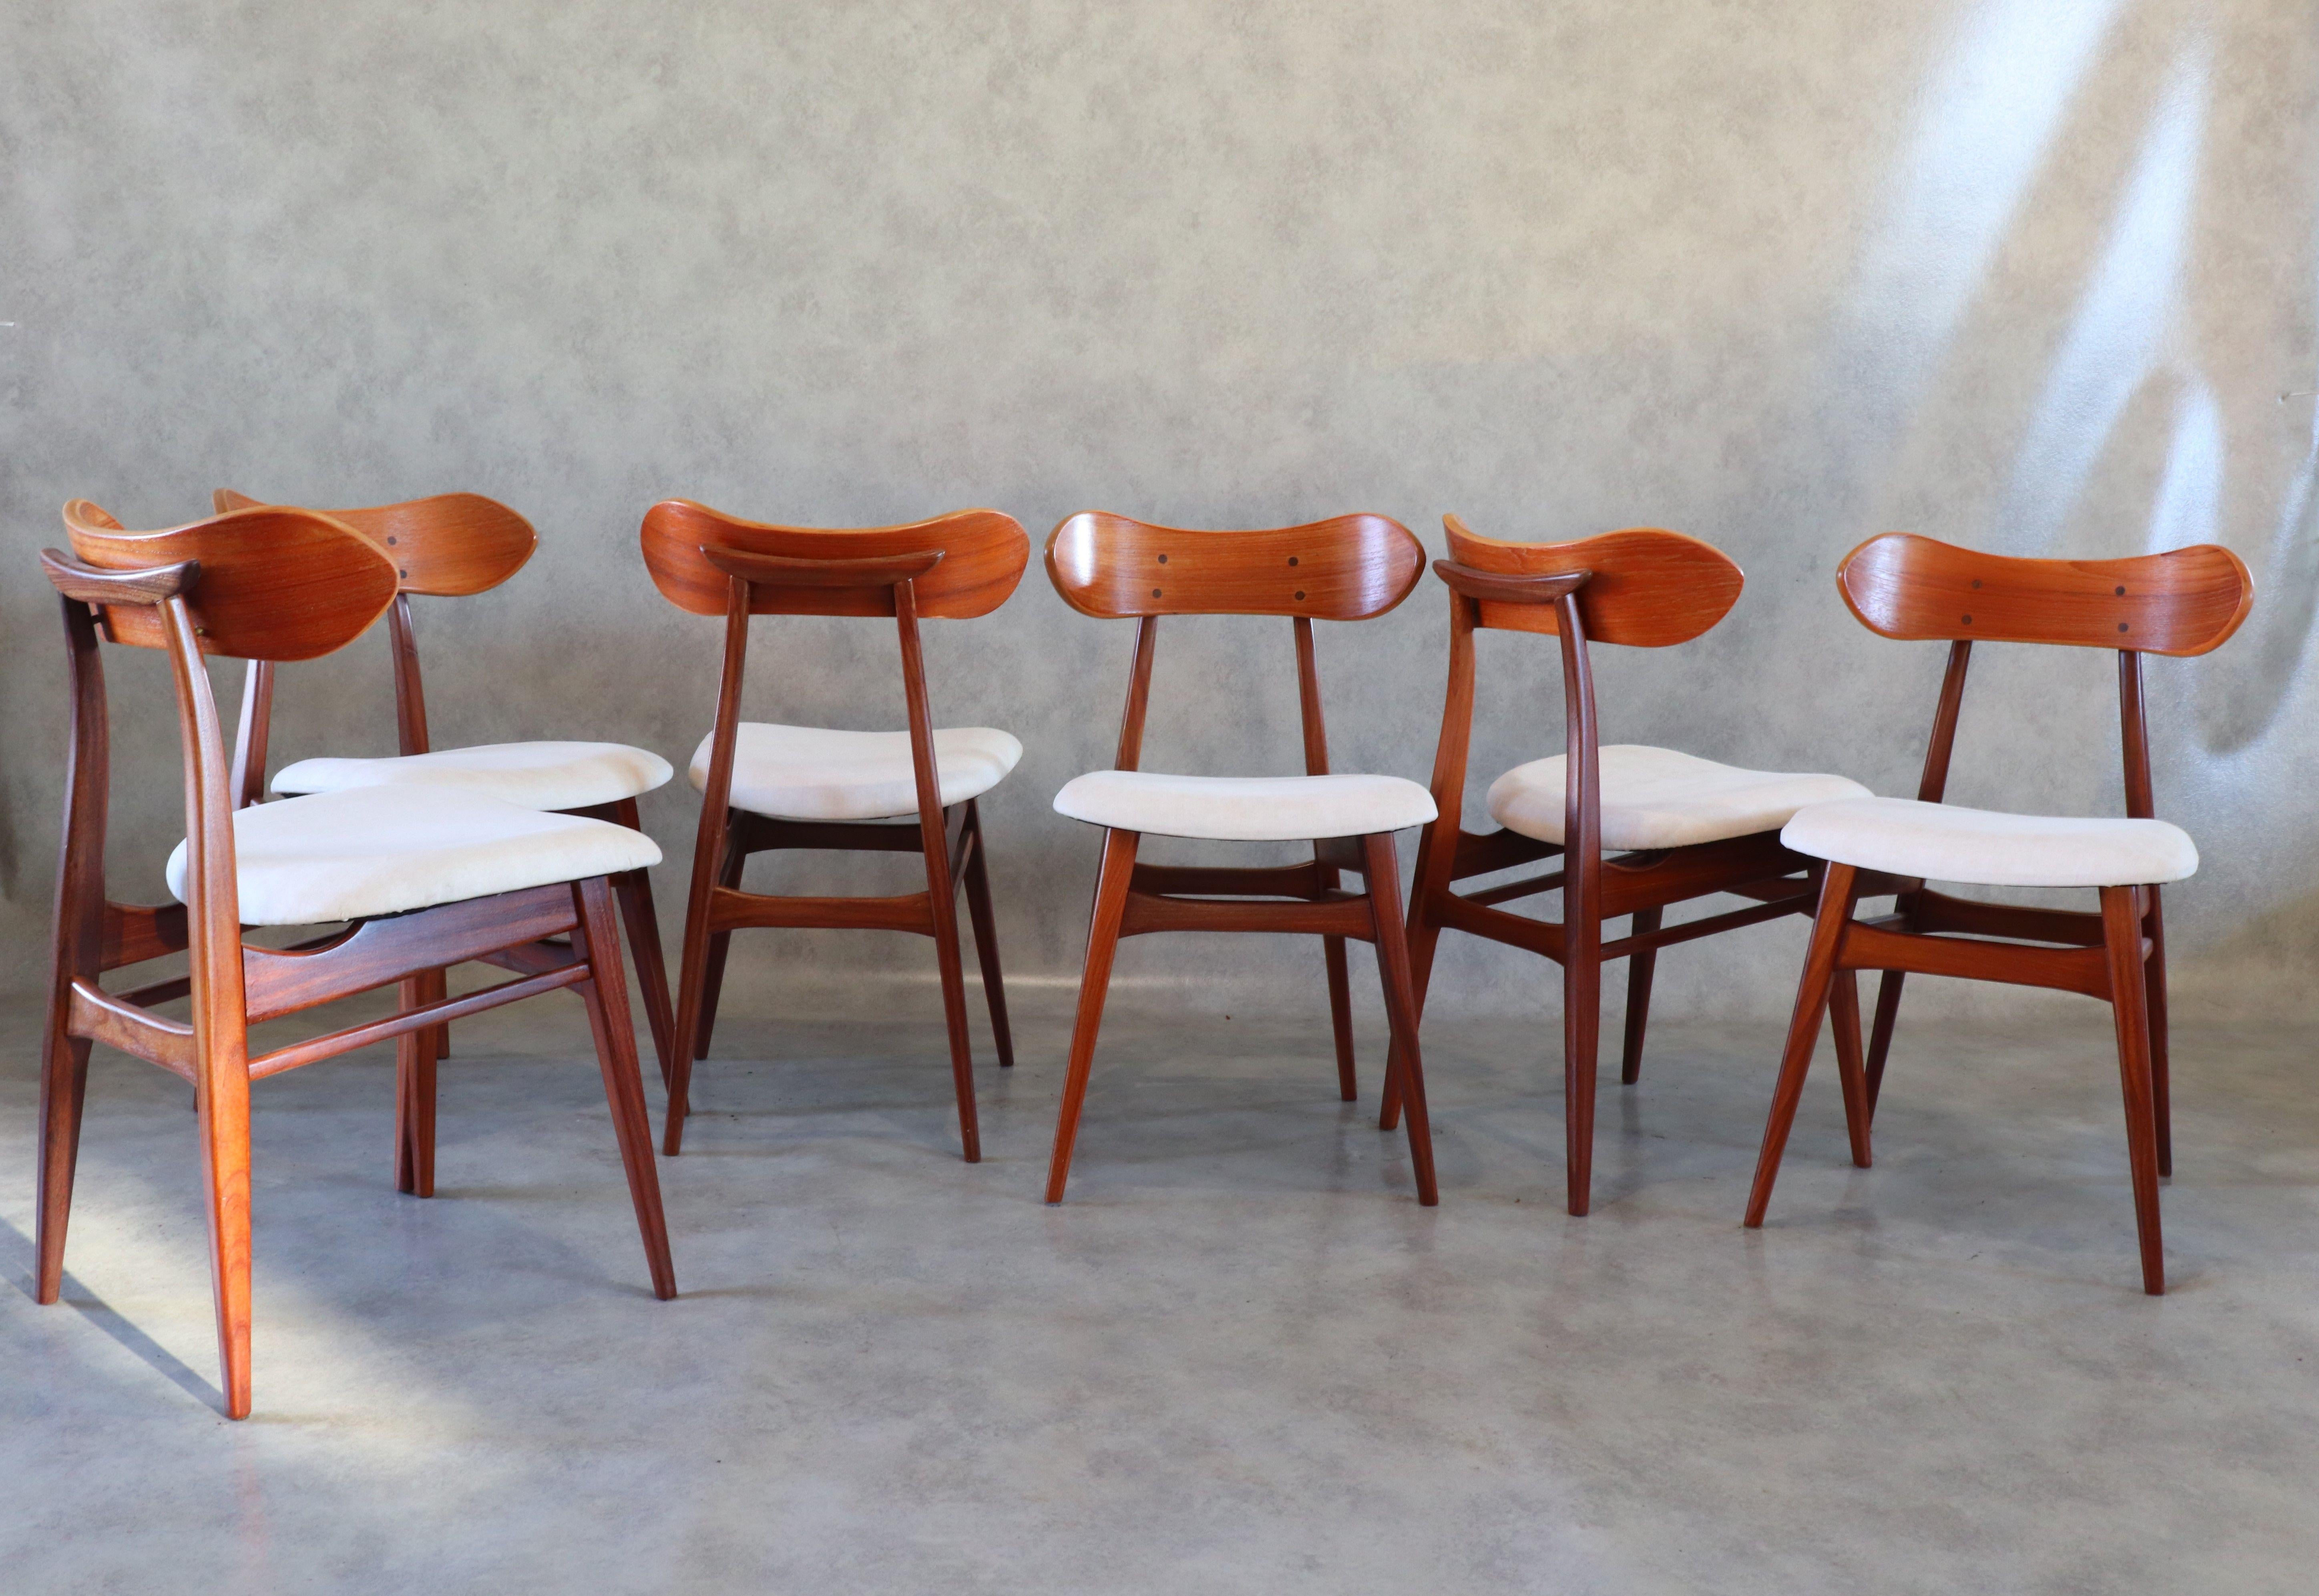 These rare Louis Van Teeffelen chairs belong to the Kastrup bedroom and are also used as dining room chairs. They are made of teak wood and covered with a new light beige fabric.